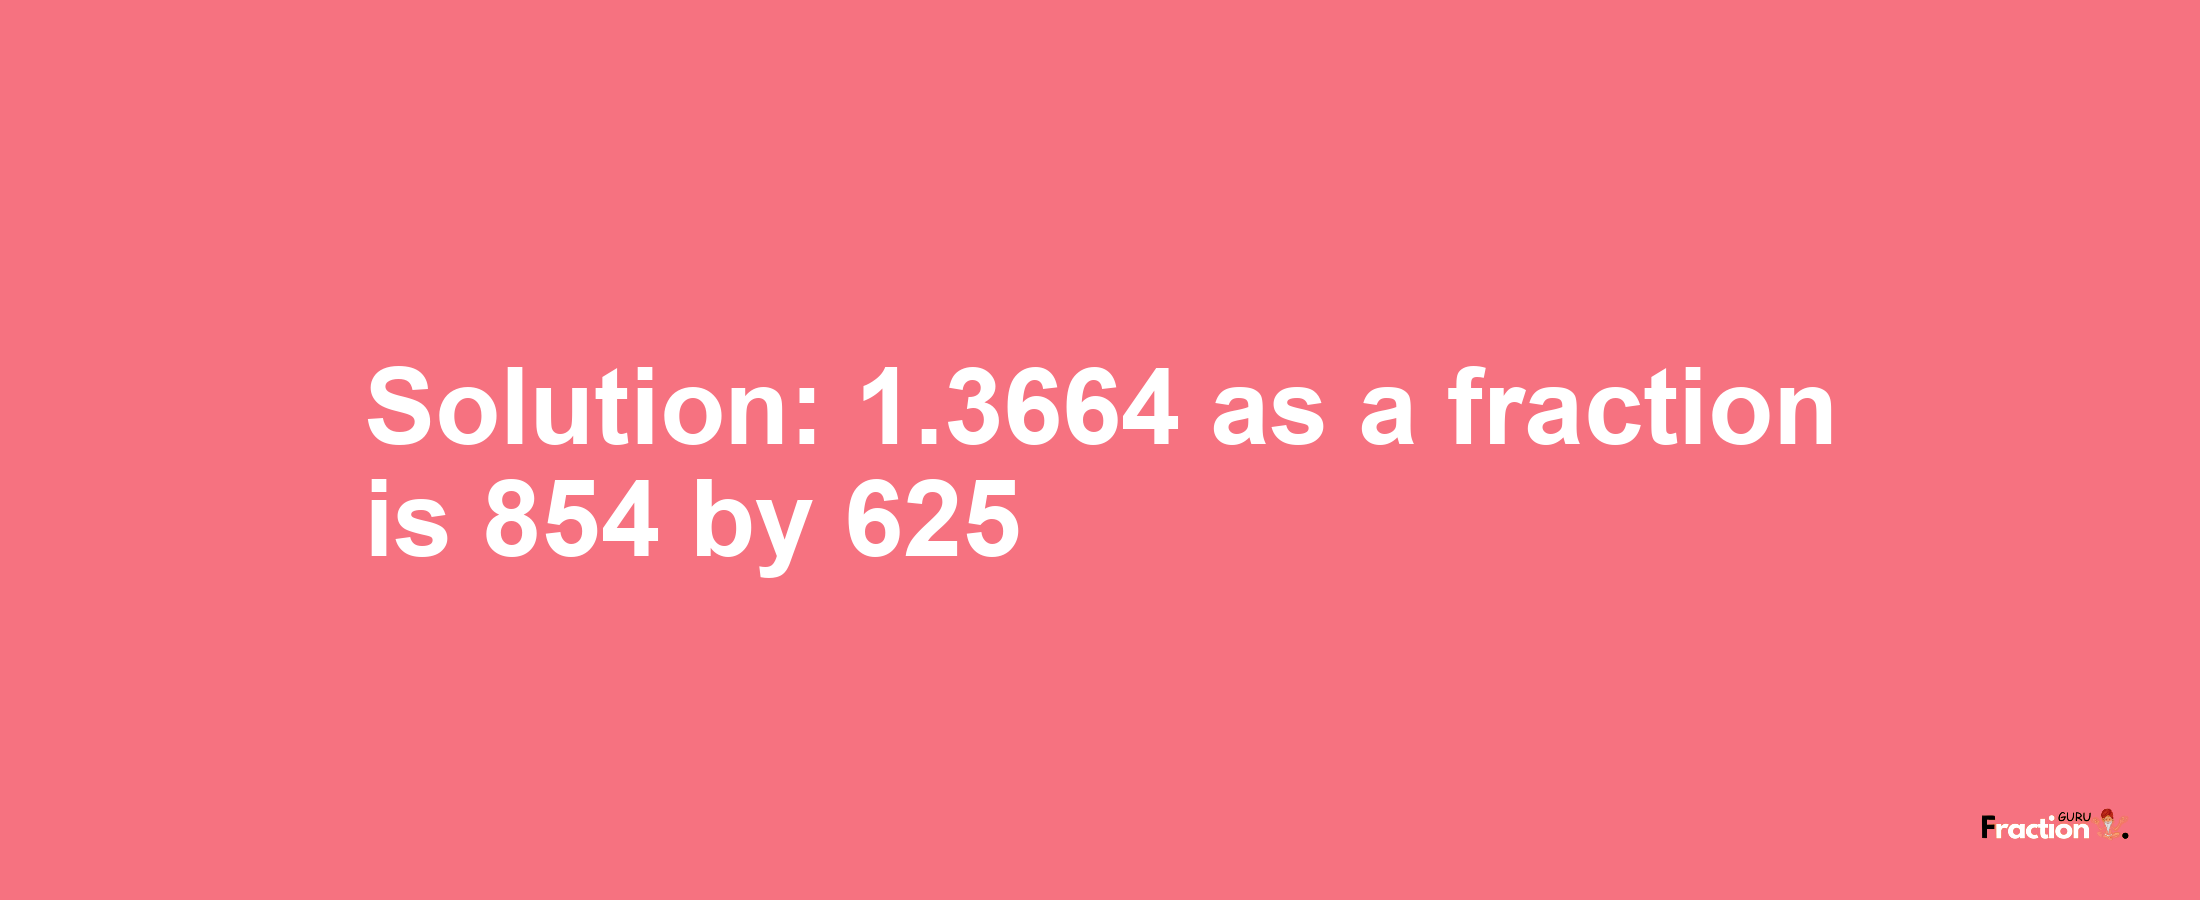 Solution:1.3664 as a fraction is 854/625